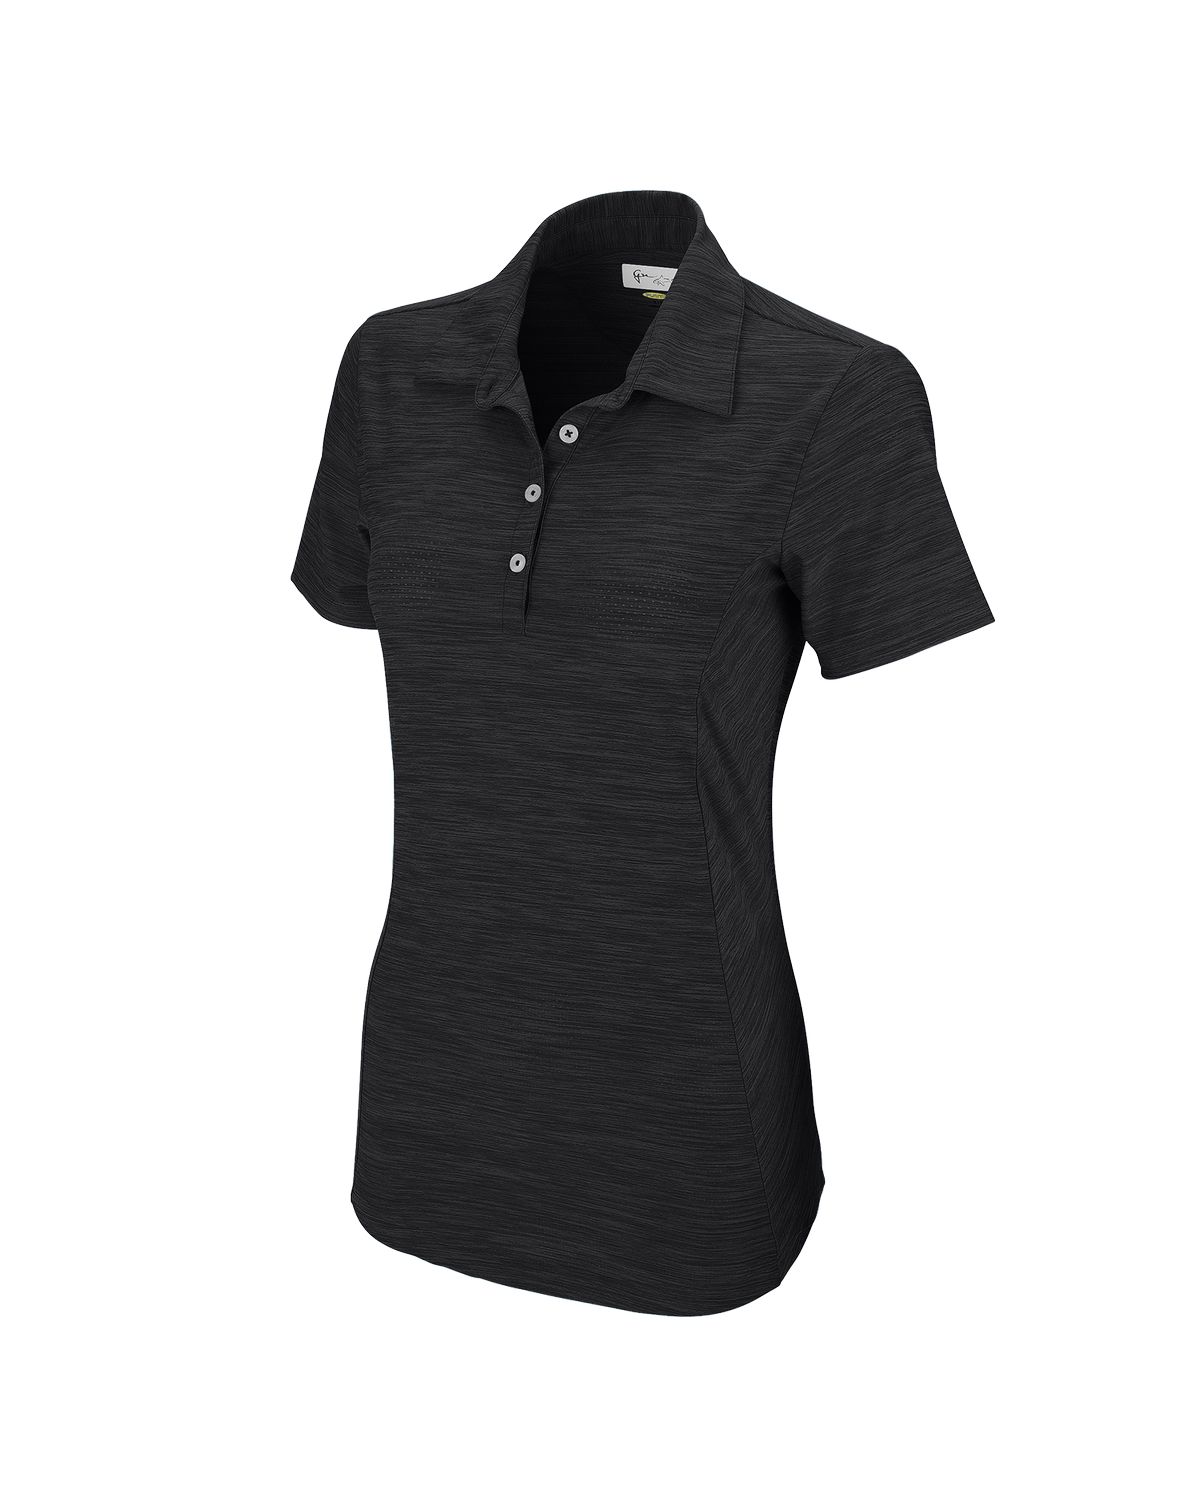 'Greg Norman WNS9K478 Women's Play Dry Heather Solid Polo'